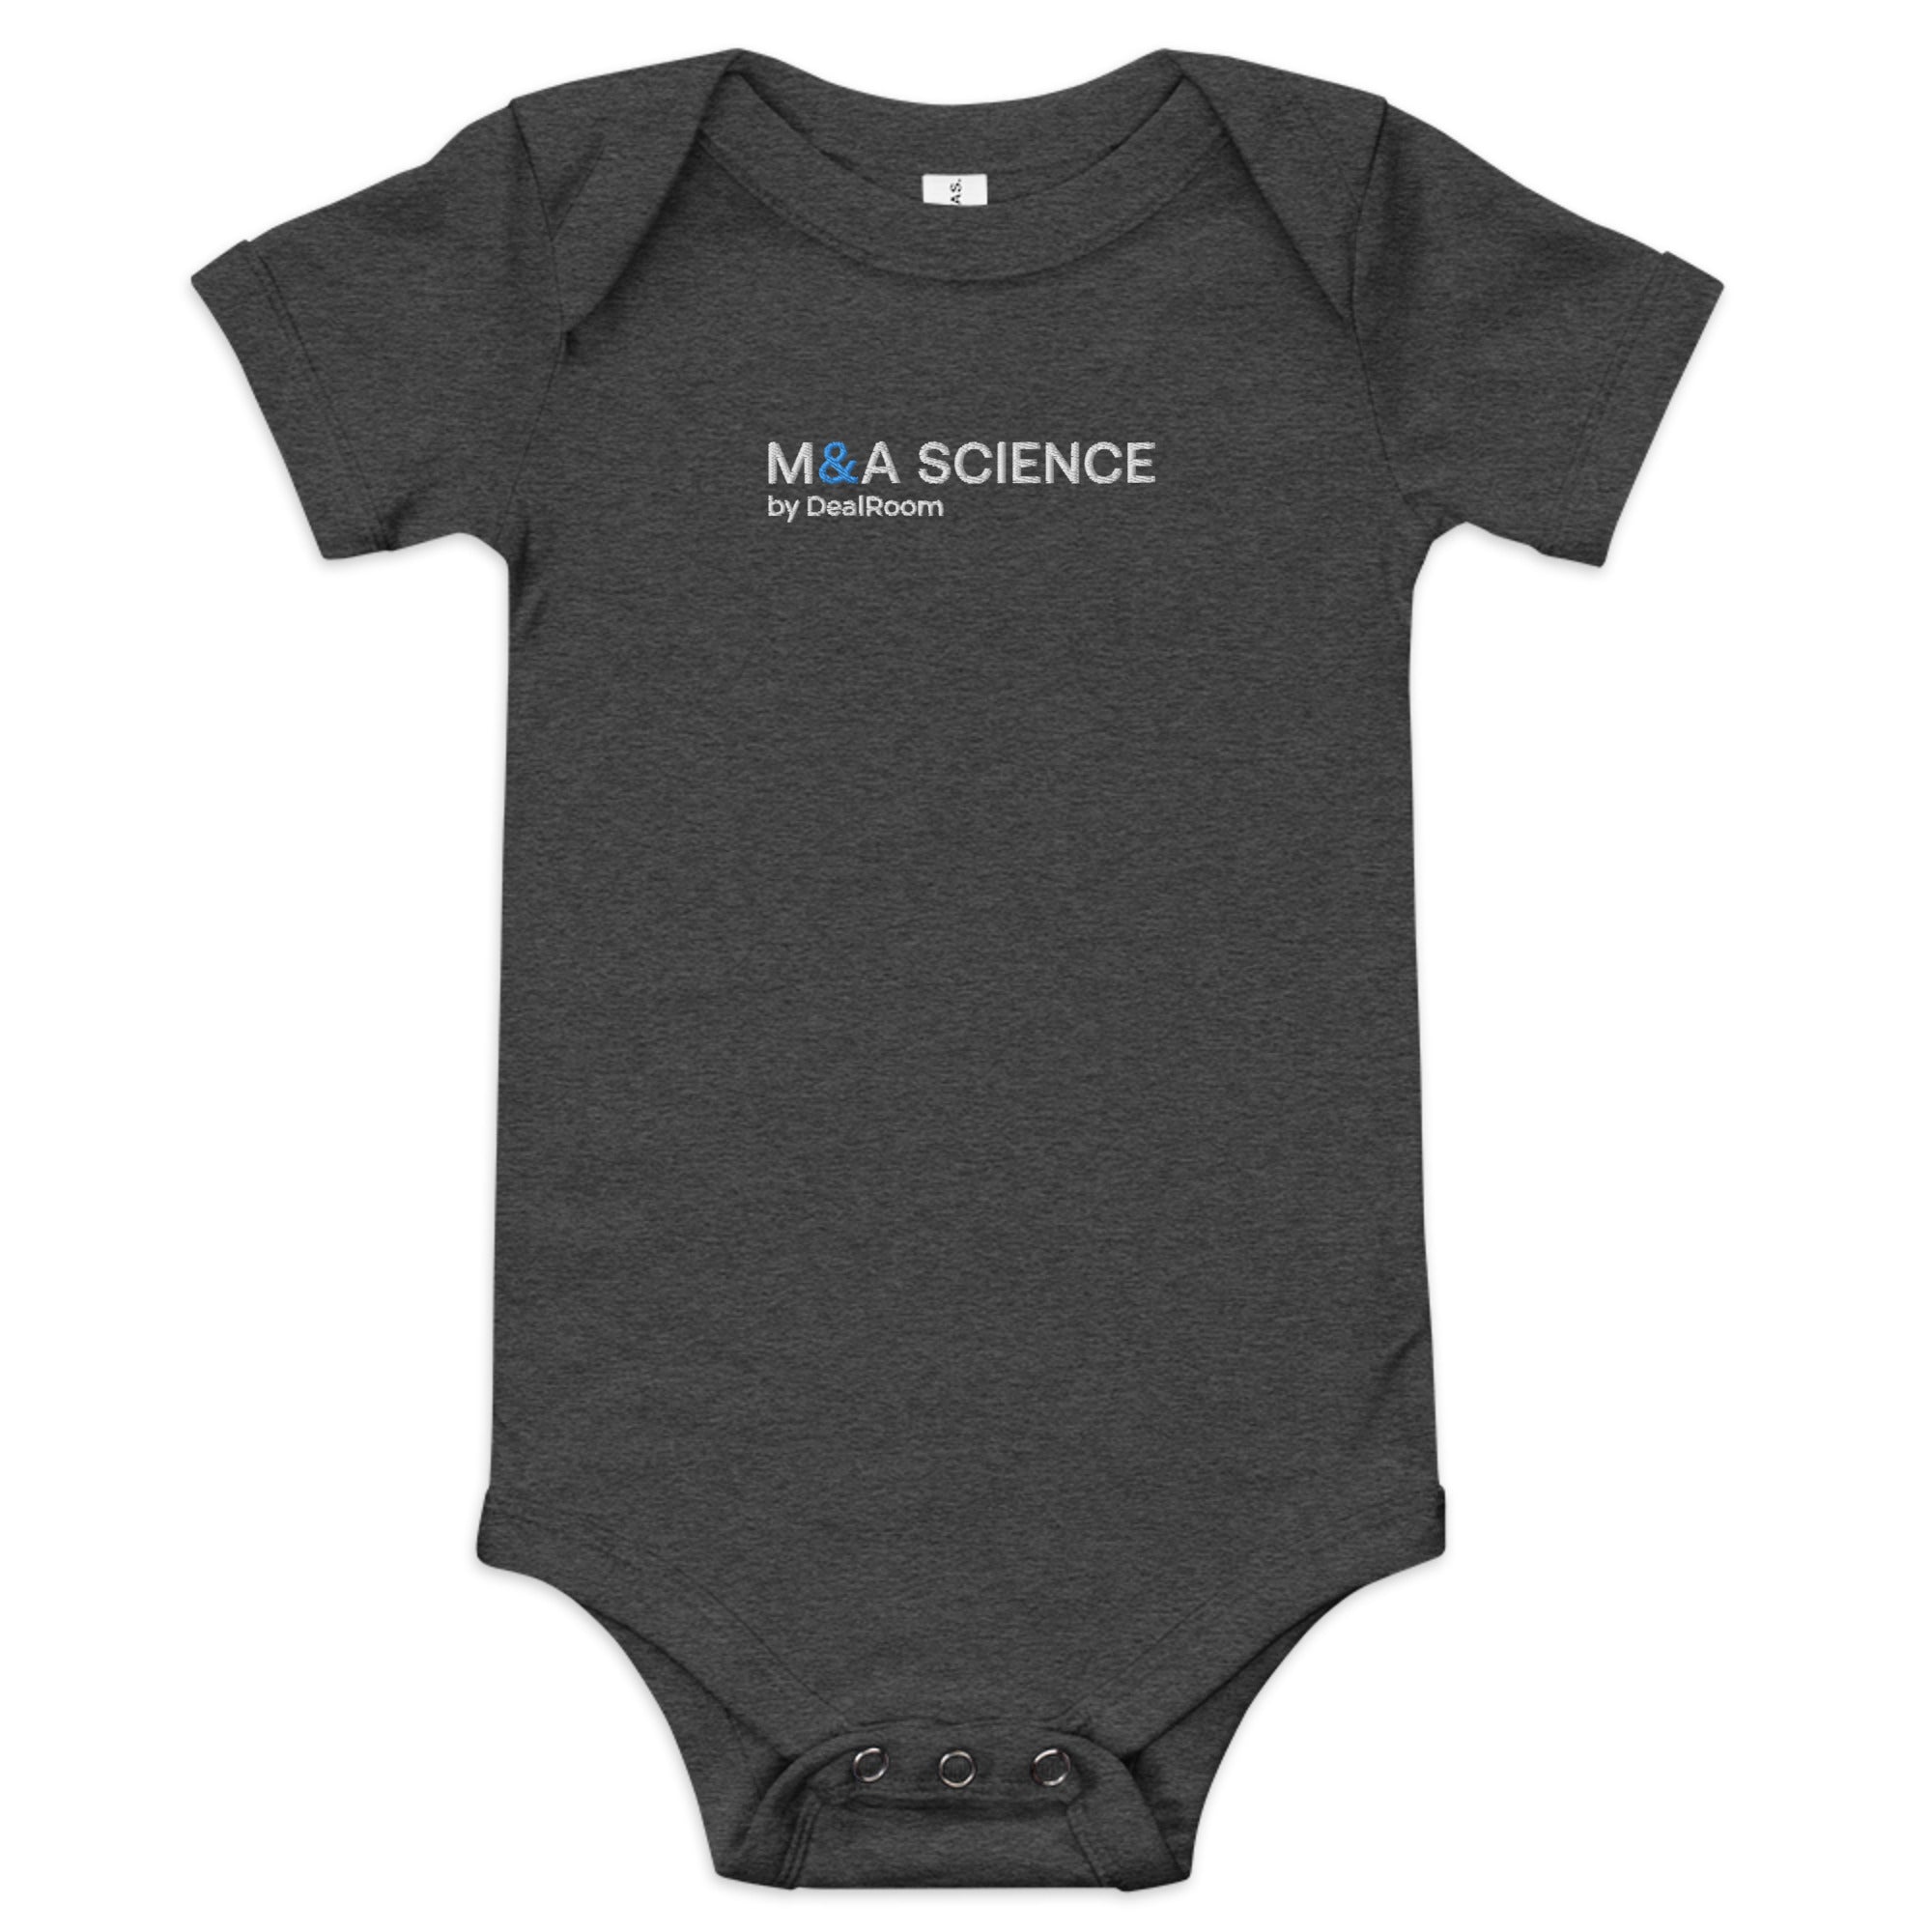 M&A Science Baby short sleeve one piece